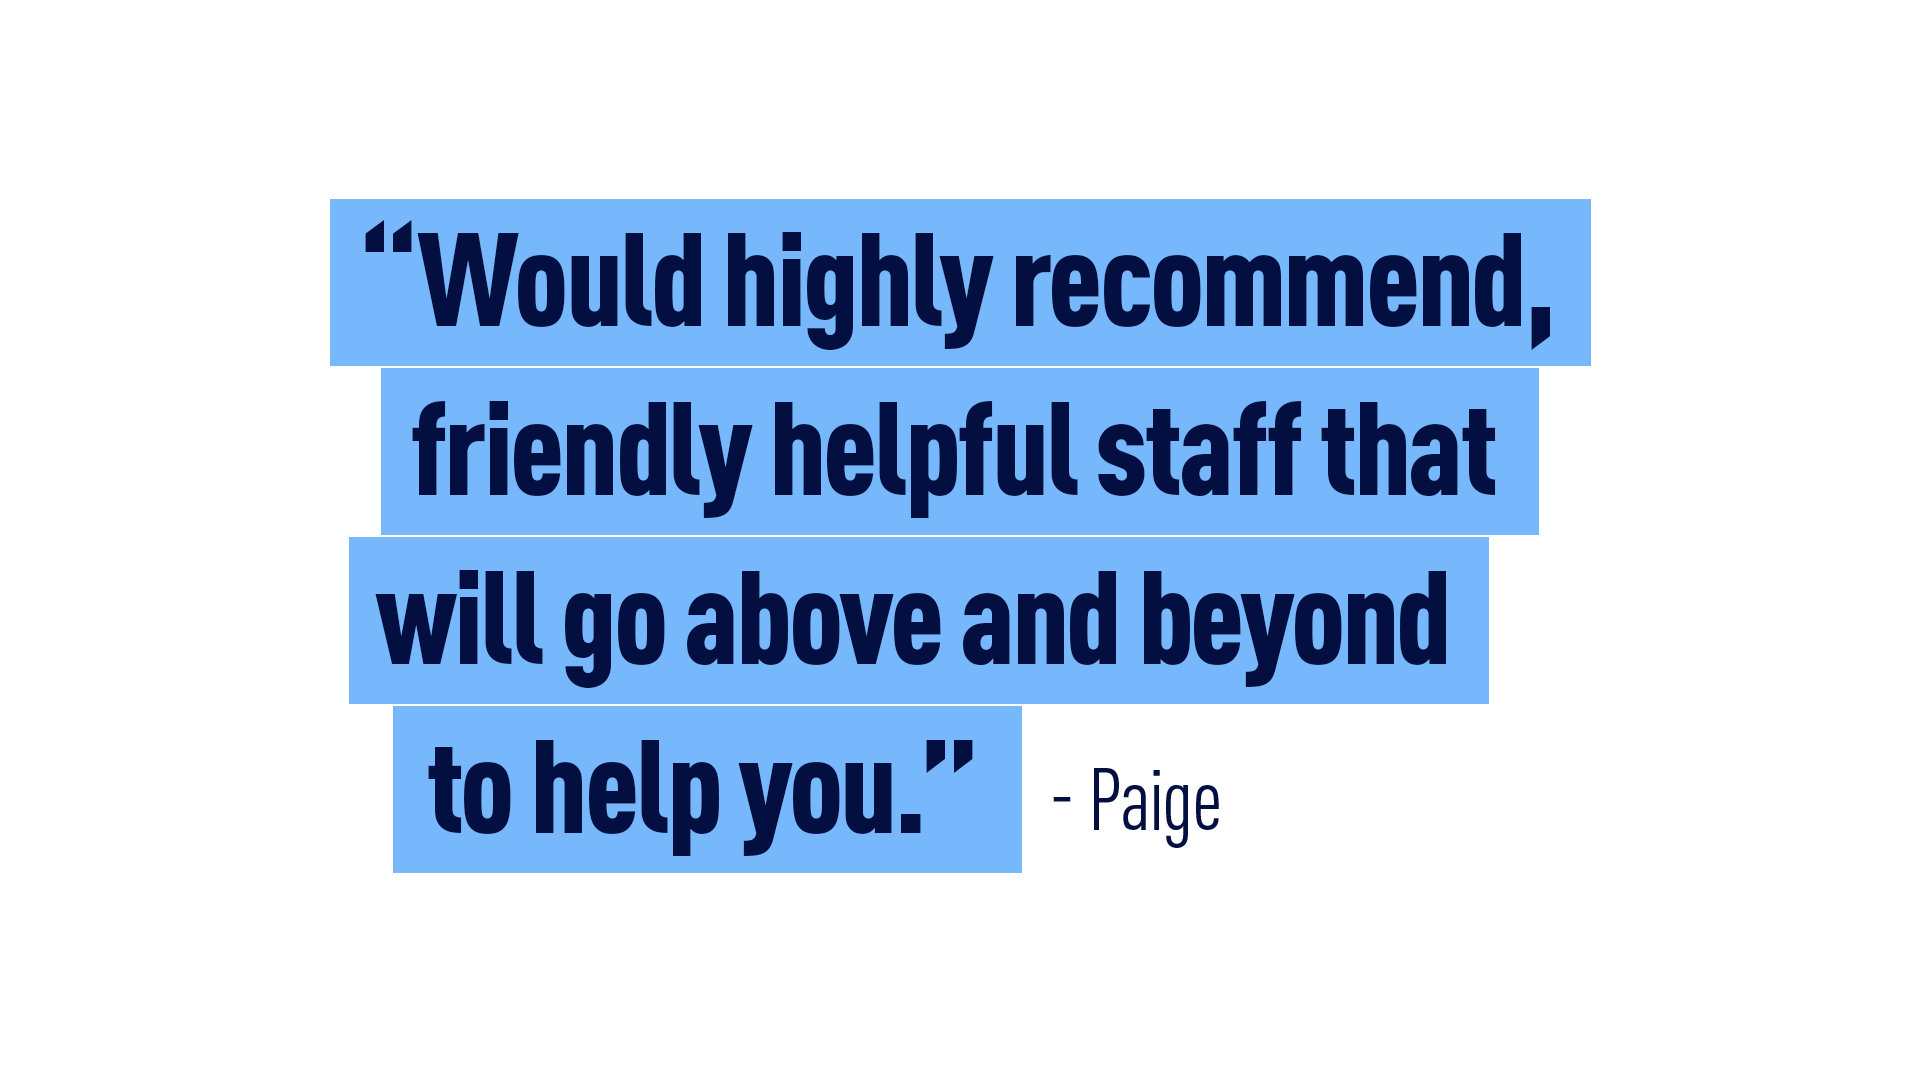 “Would highly recommend, friendly helpful staff that will go above and beyond to help you.” Paige 